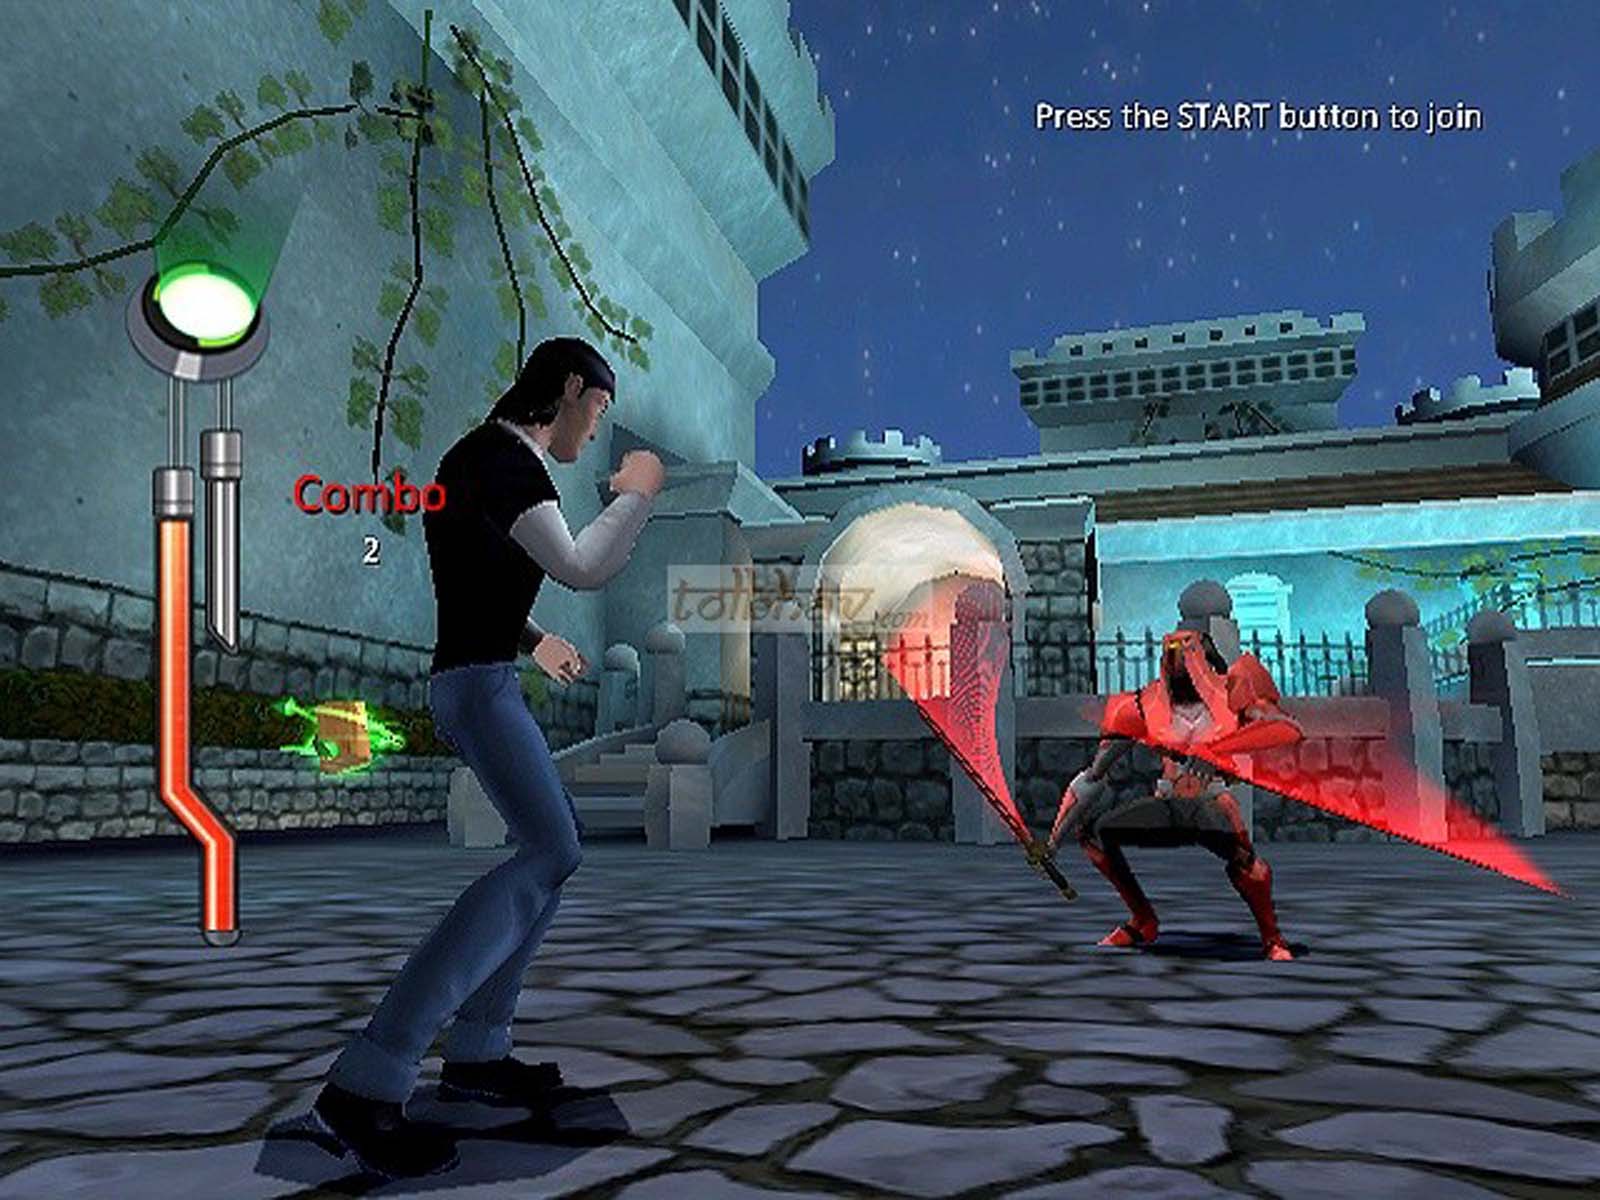 free download ben 10 alien force game for android